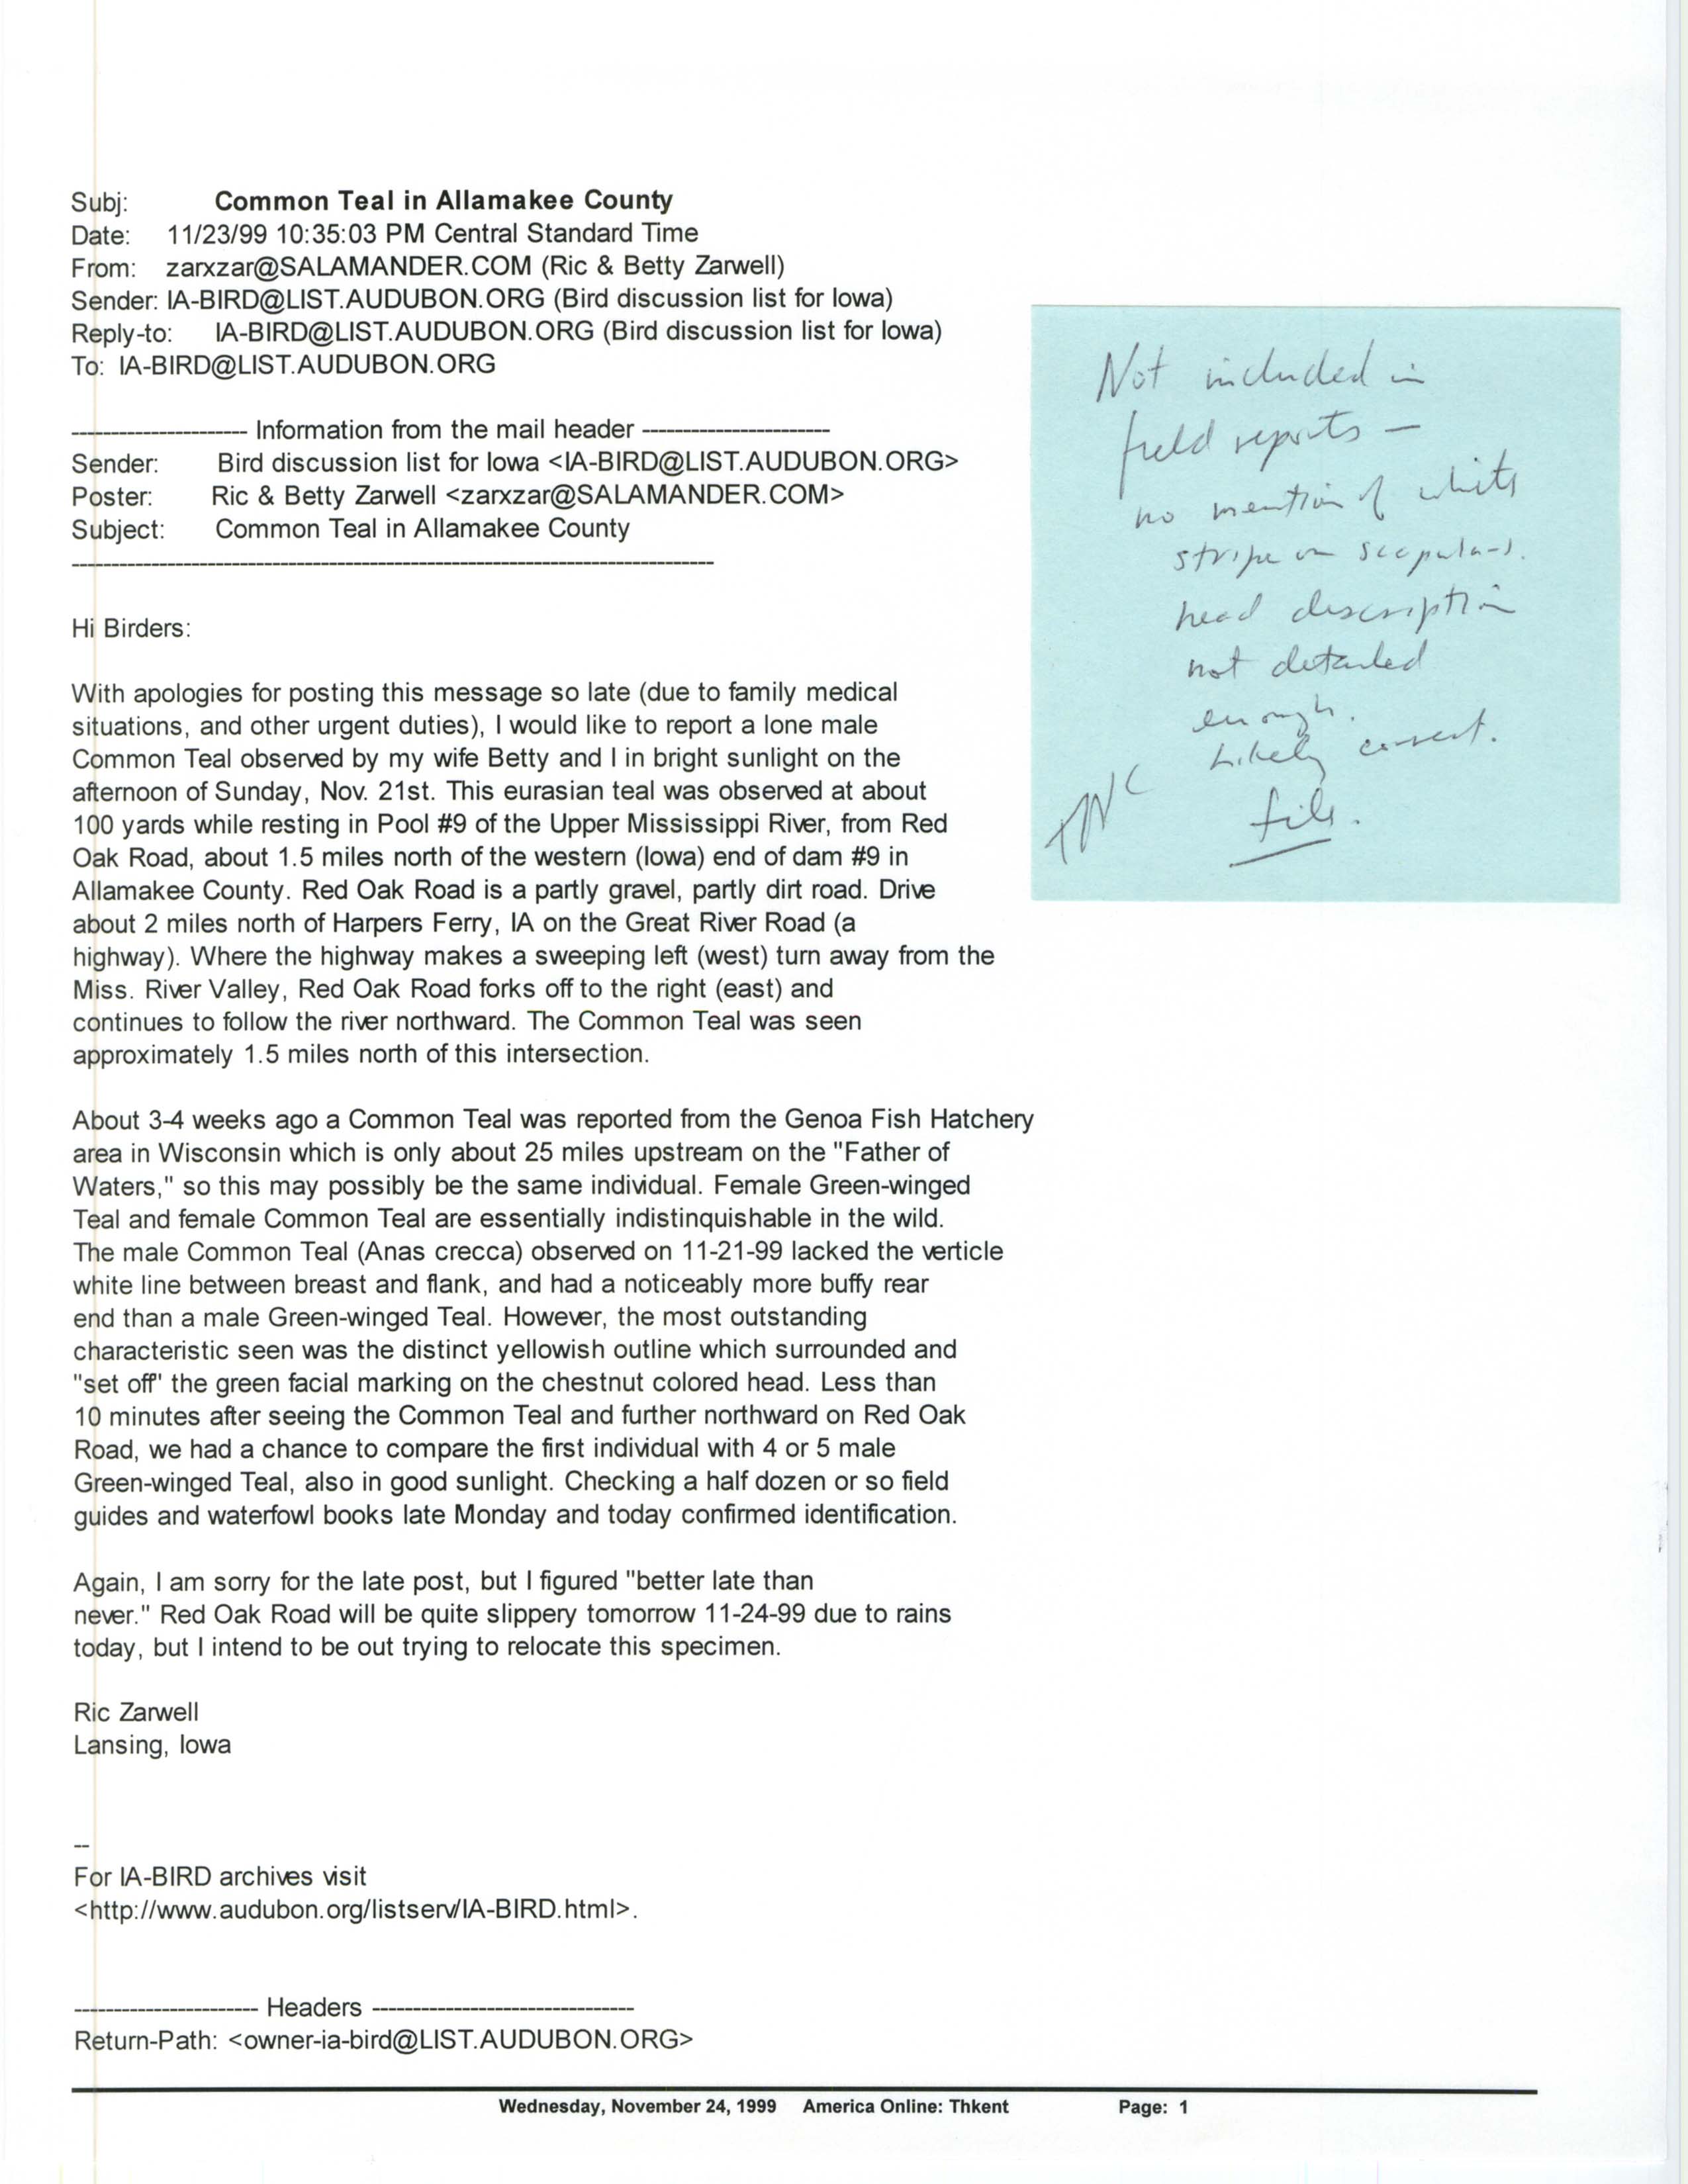 Email from Ric Zarwell to IA-BIRD list regarding a Blue-winged Teal, November 23, 1999